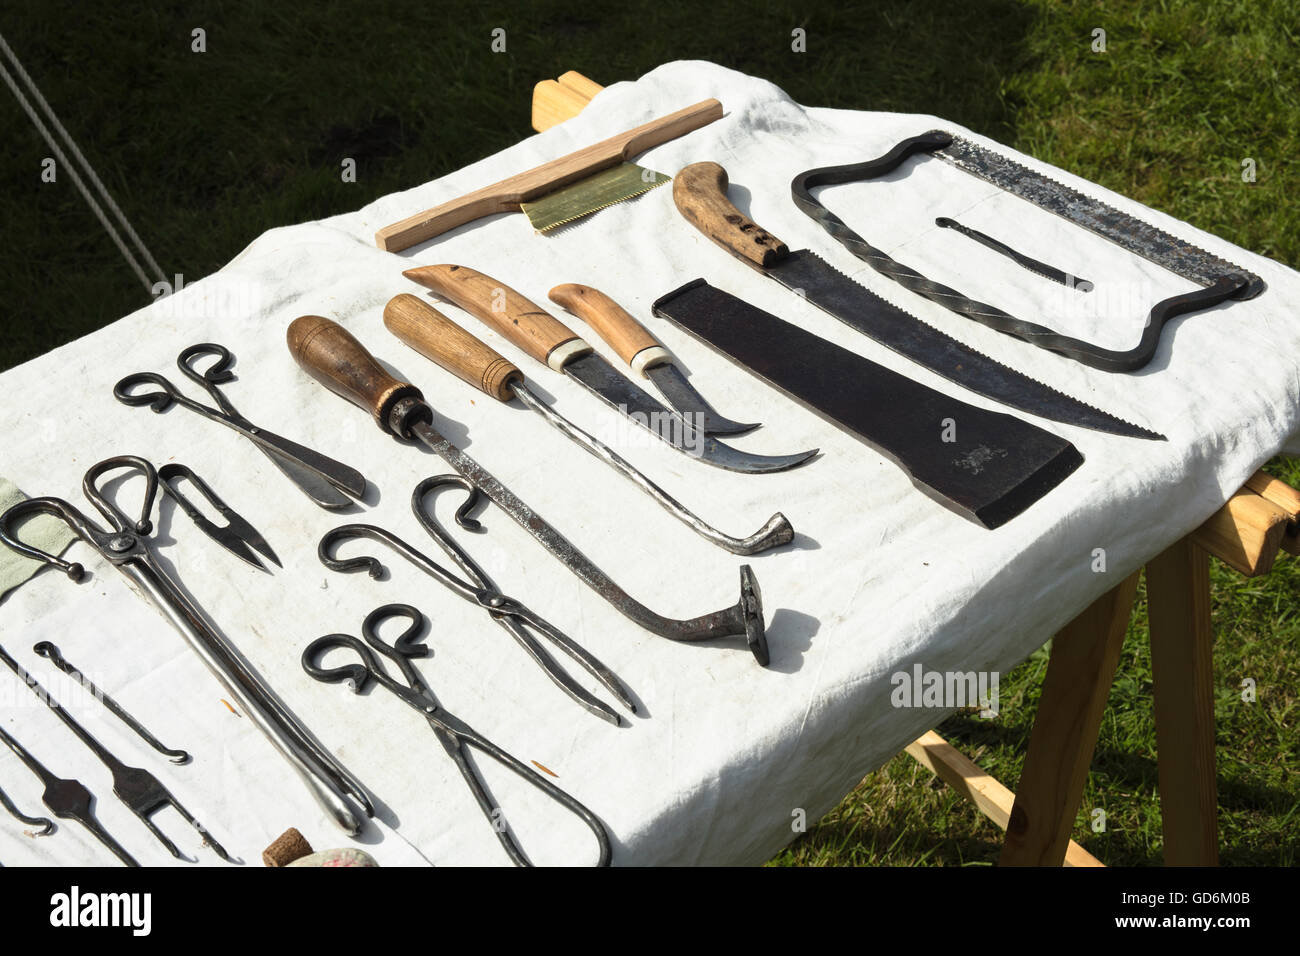 View of medieval medical instruments on a table Stock Photo